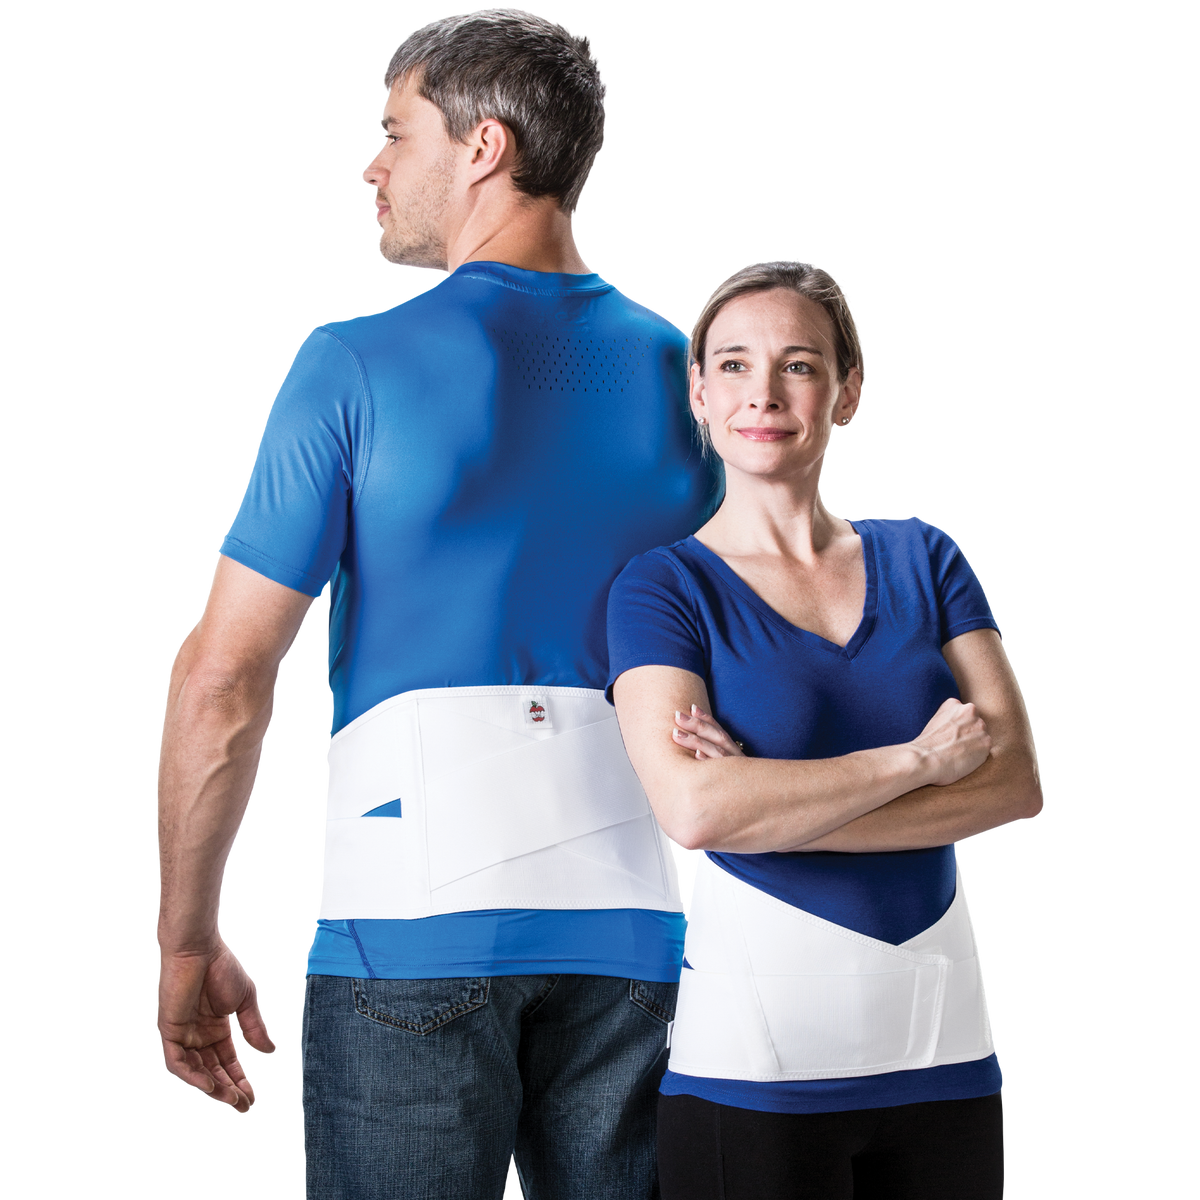 Lower back brace, 2 cross straps, Available in various sizes